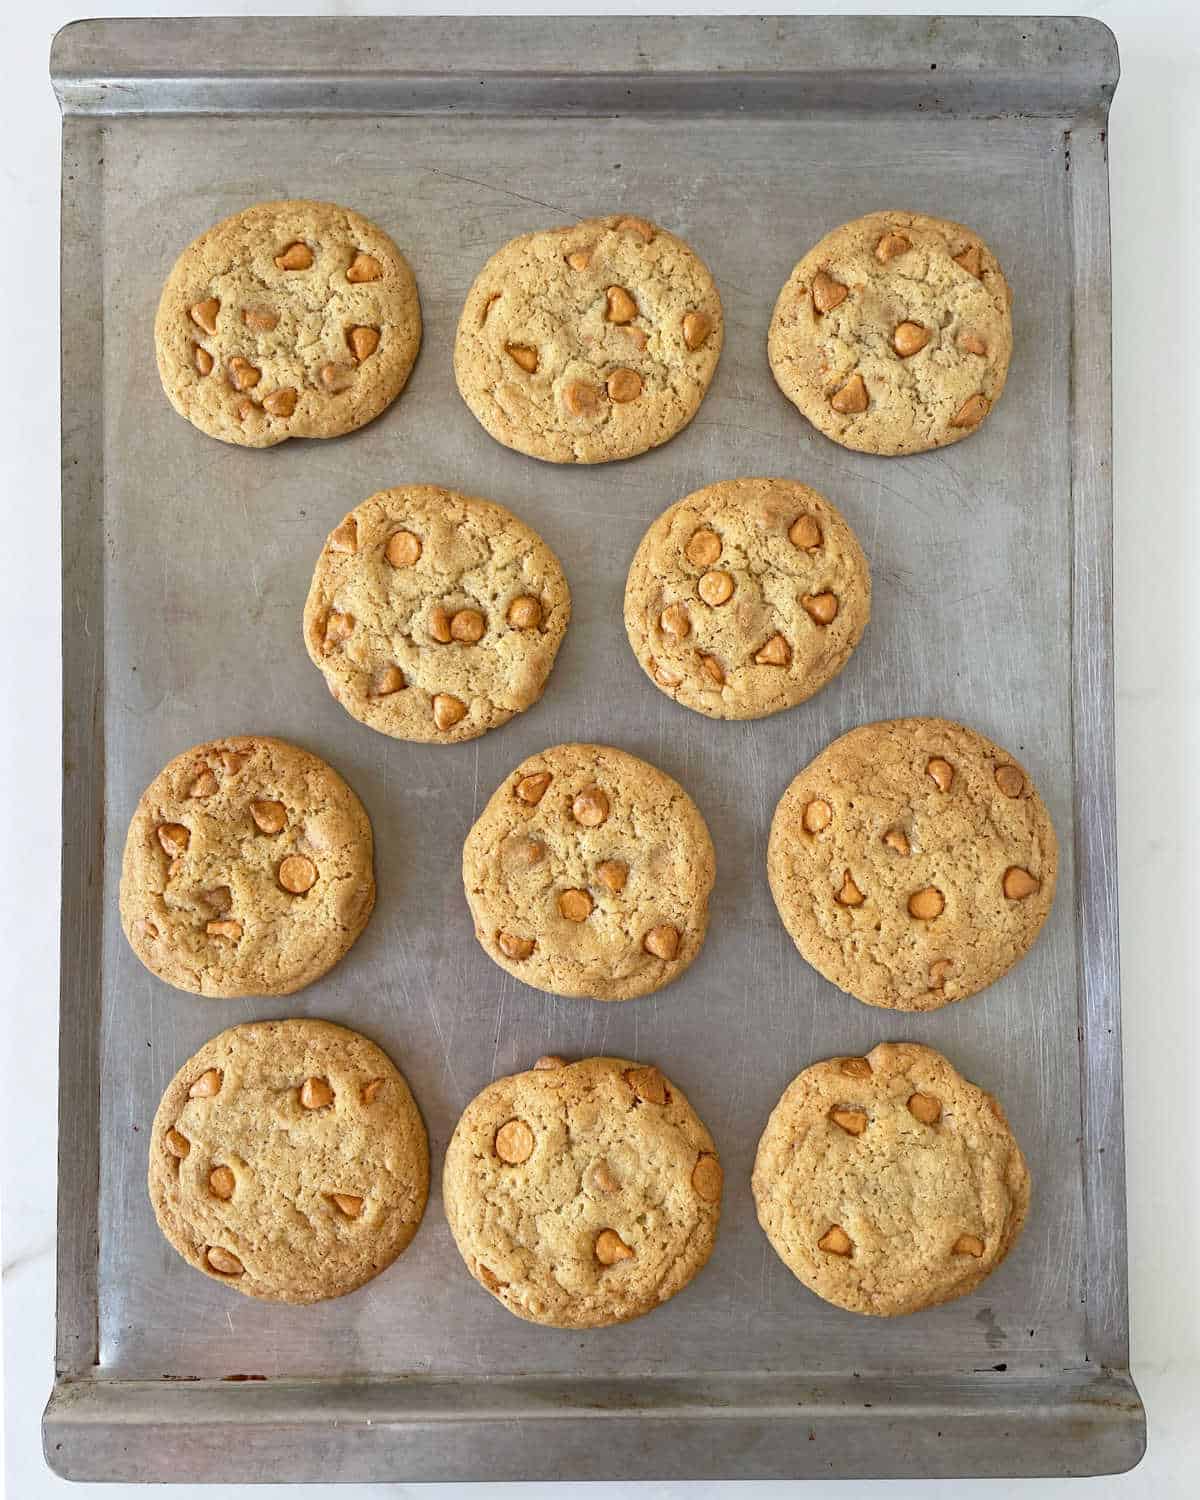 Baked butterscotch chip cookies on a metal baking pan.